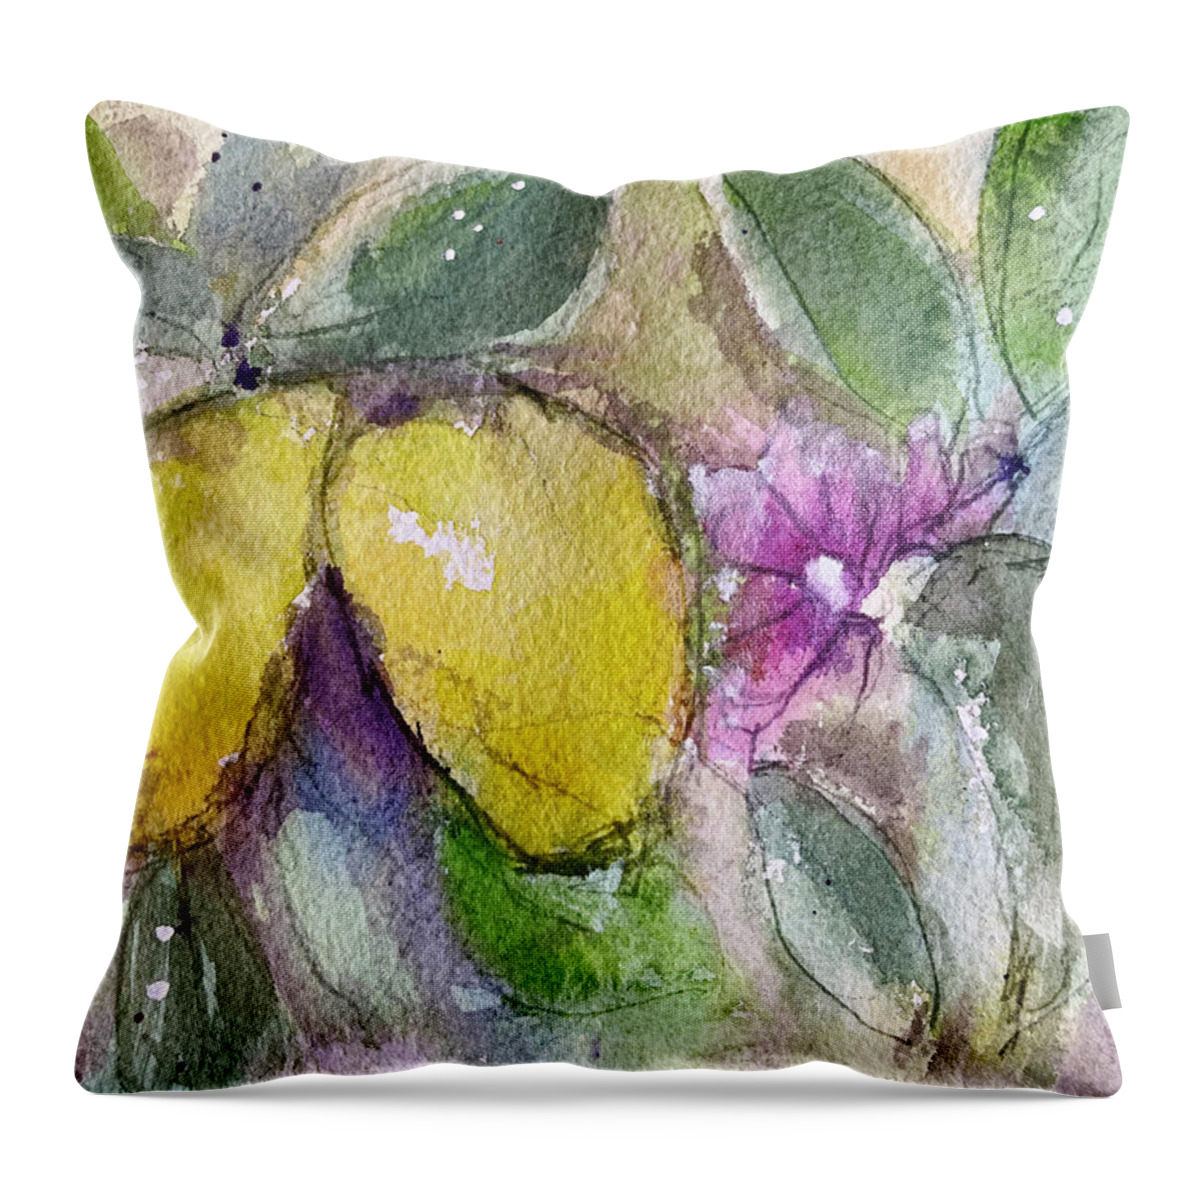 Lemons Throw Pillow featuring the painting Loose Lemons by Roxy Rich